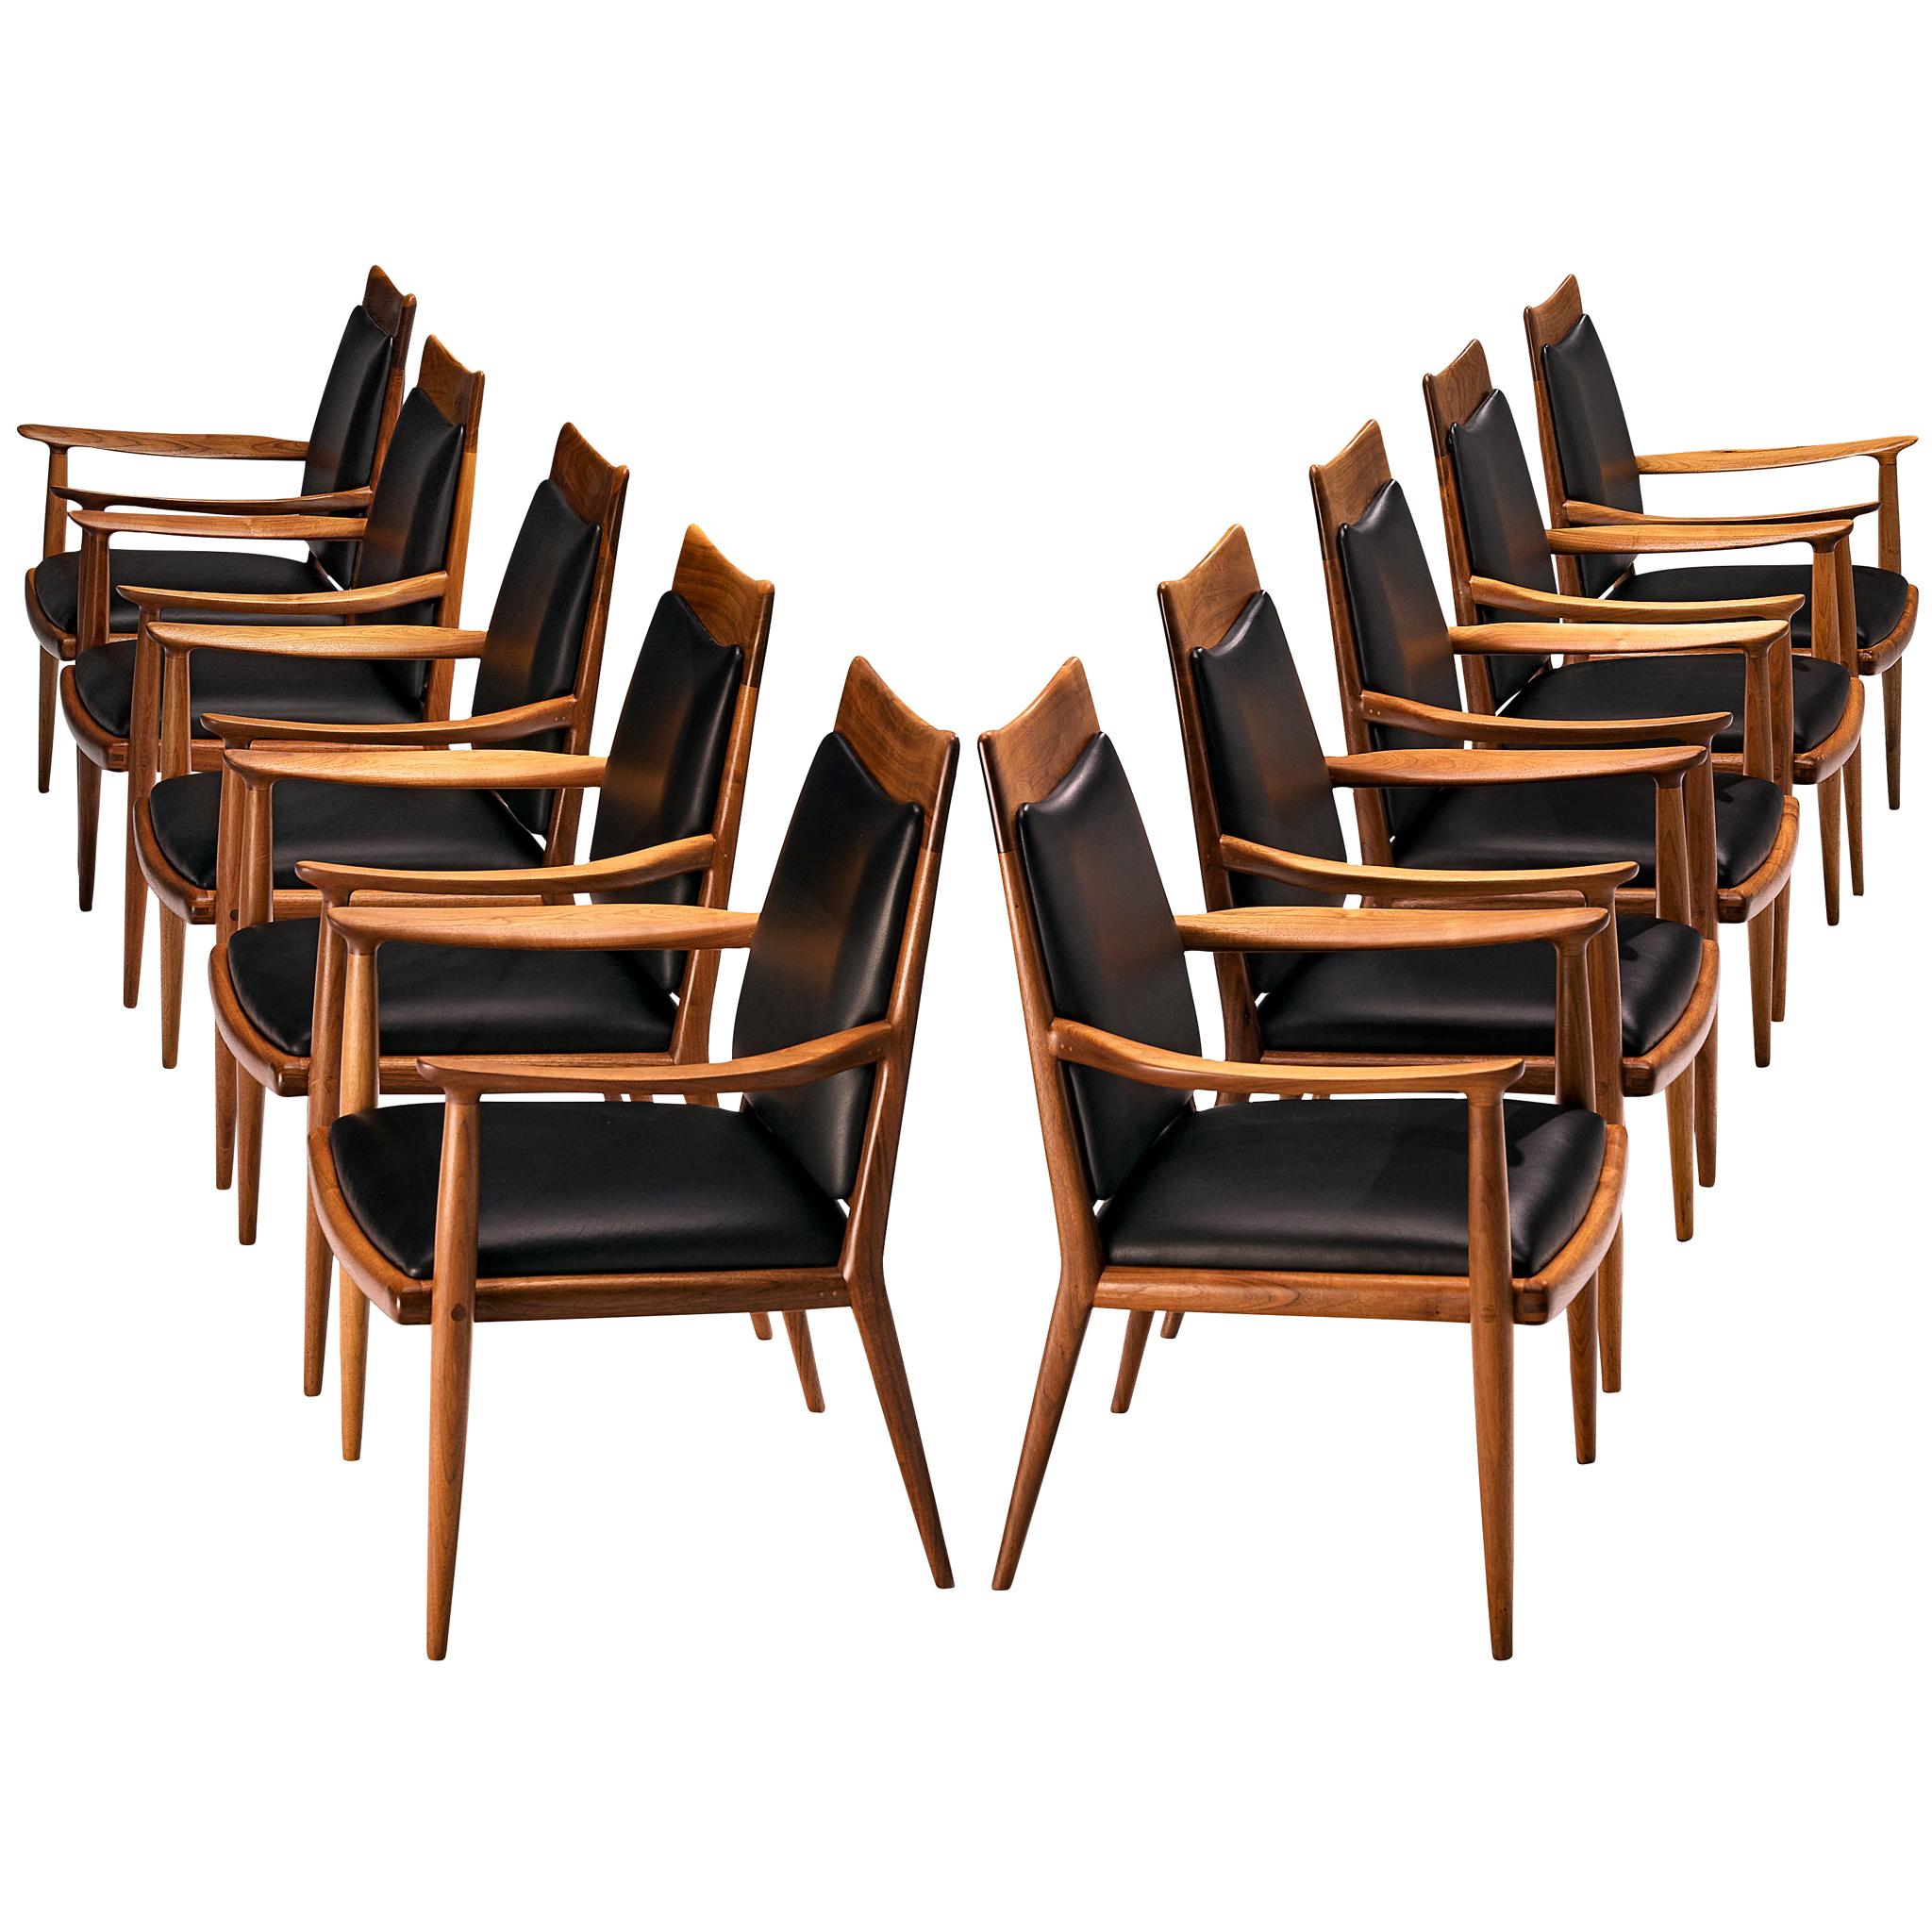 Sam Maloof Handcrafted Set of Ten Armchairs in Walnut and Black Leather